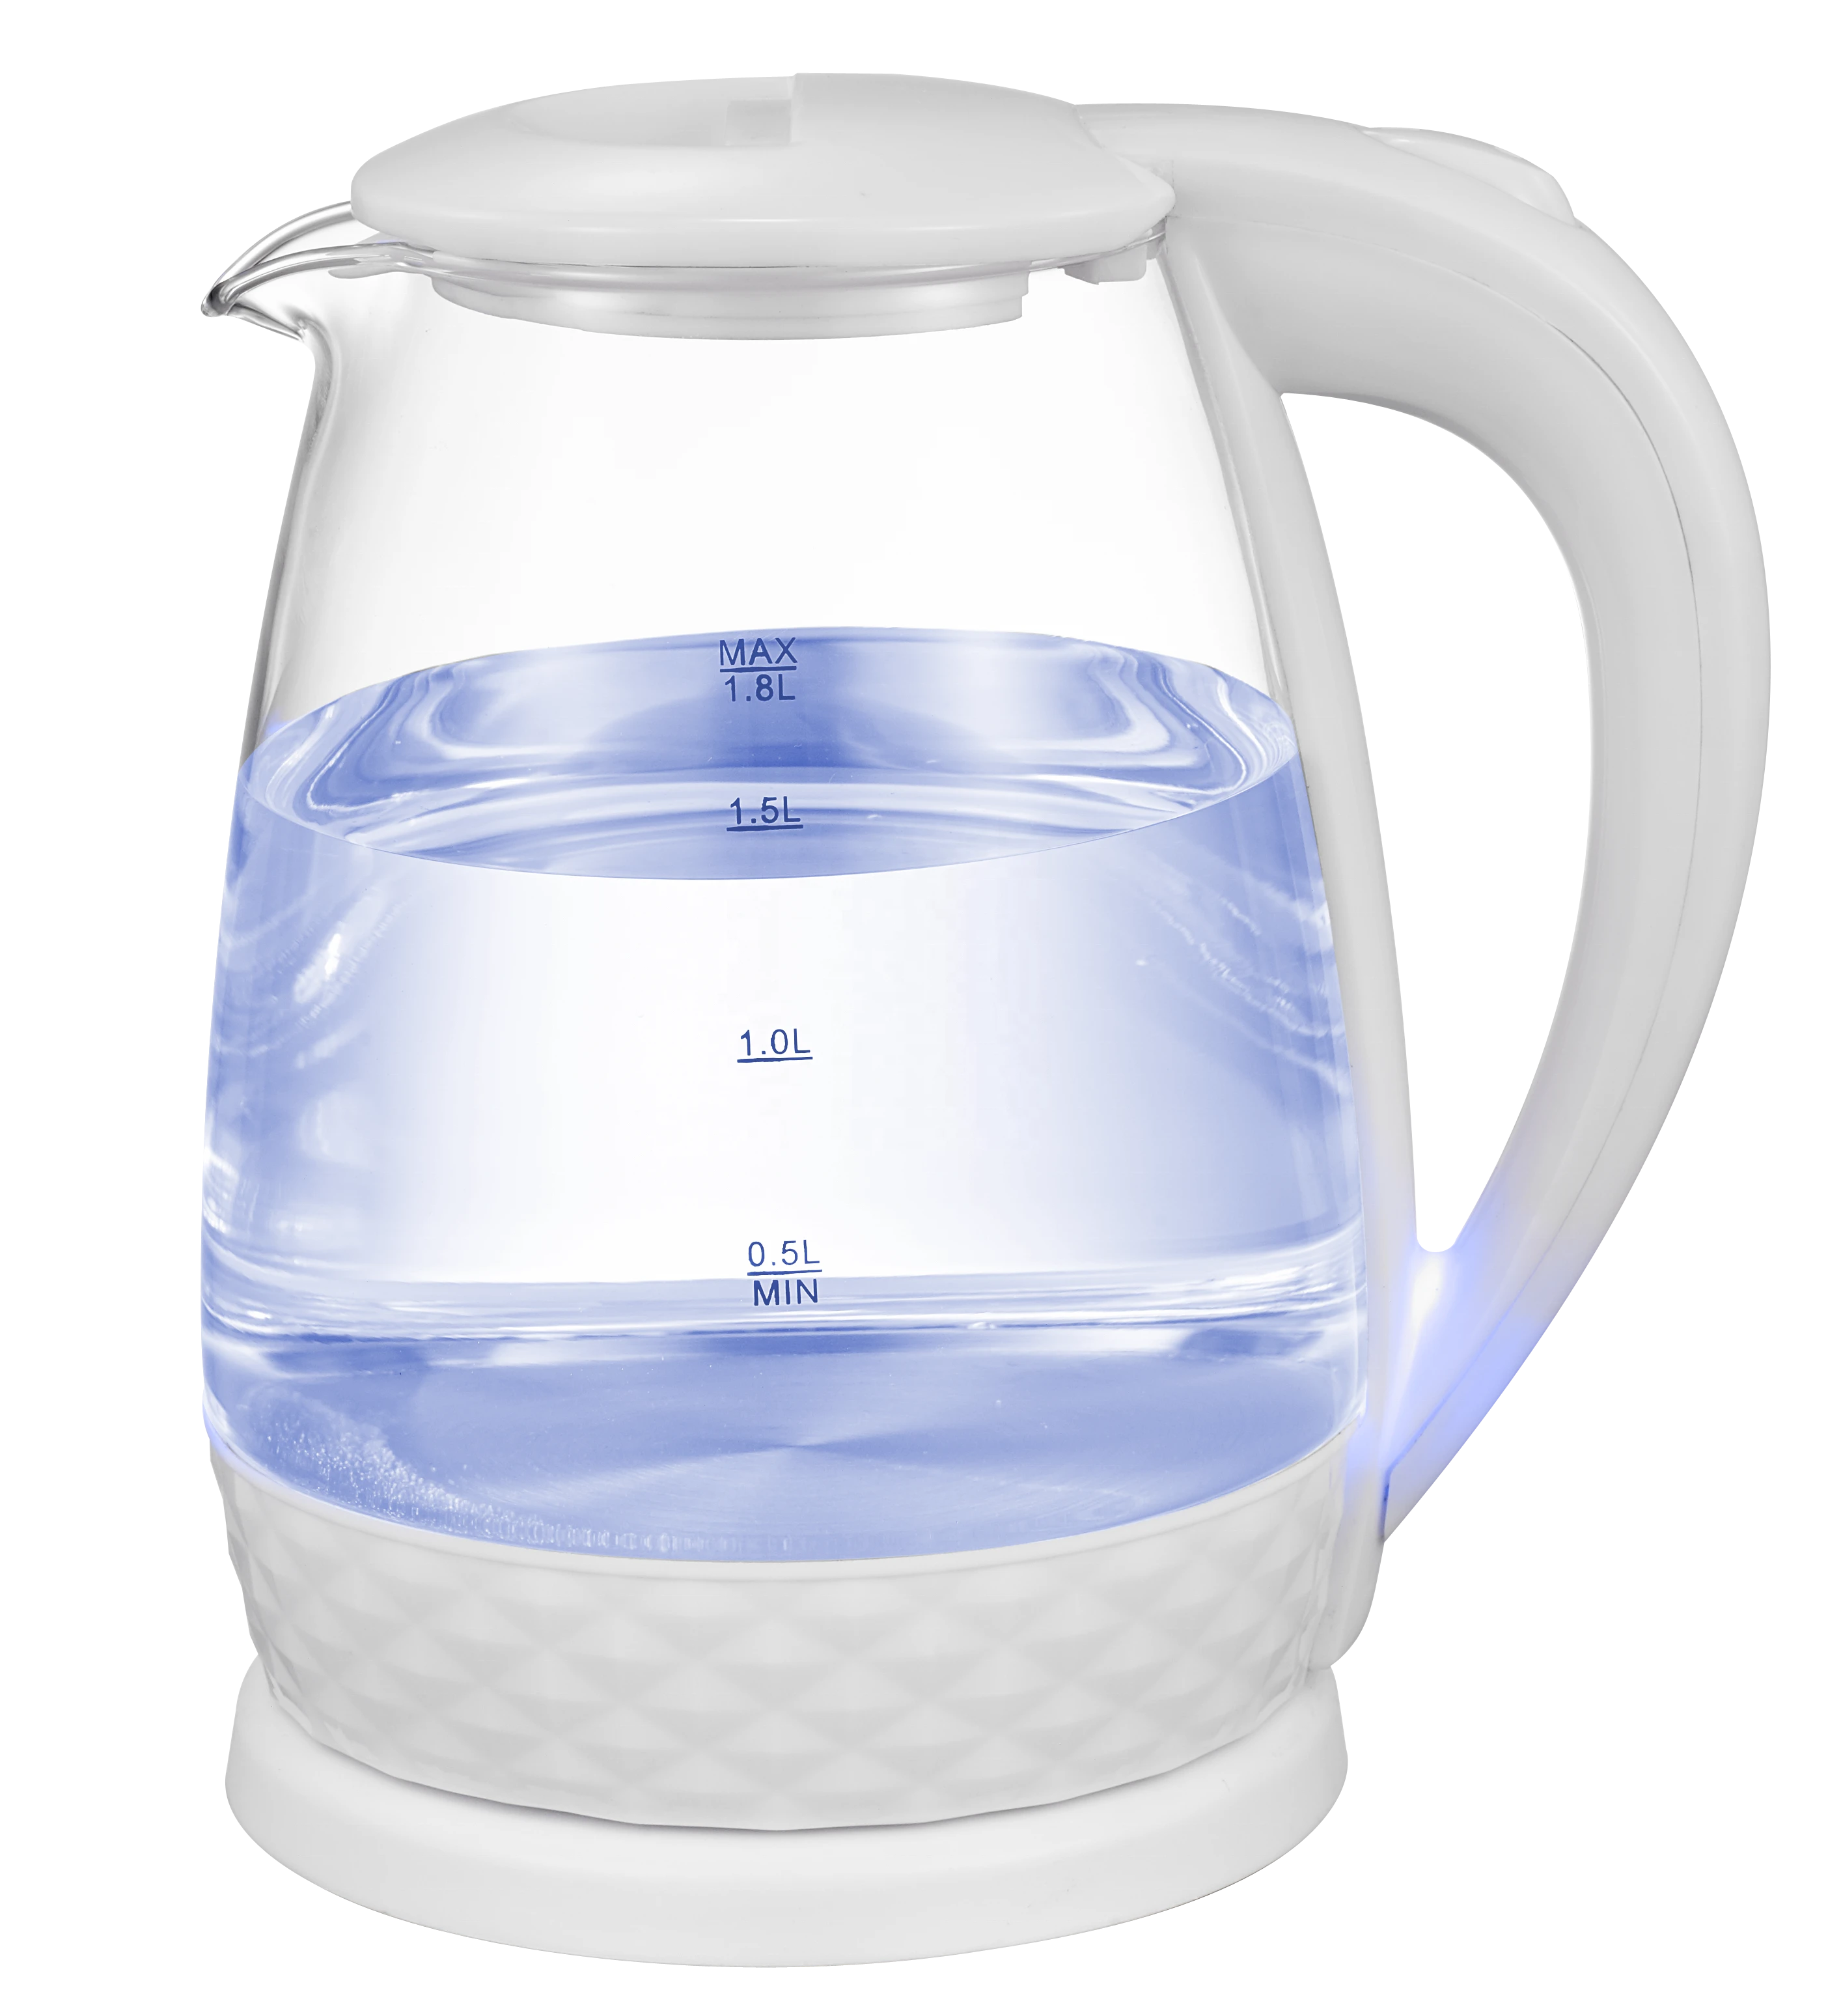 Automatic Electric Tea Maker Glass Electric Kettle